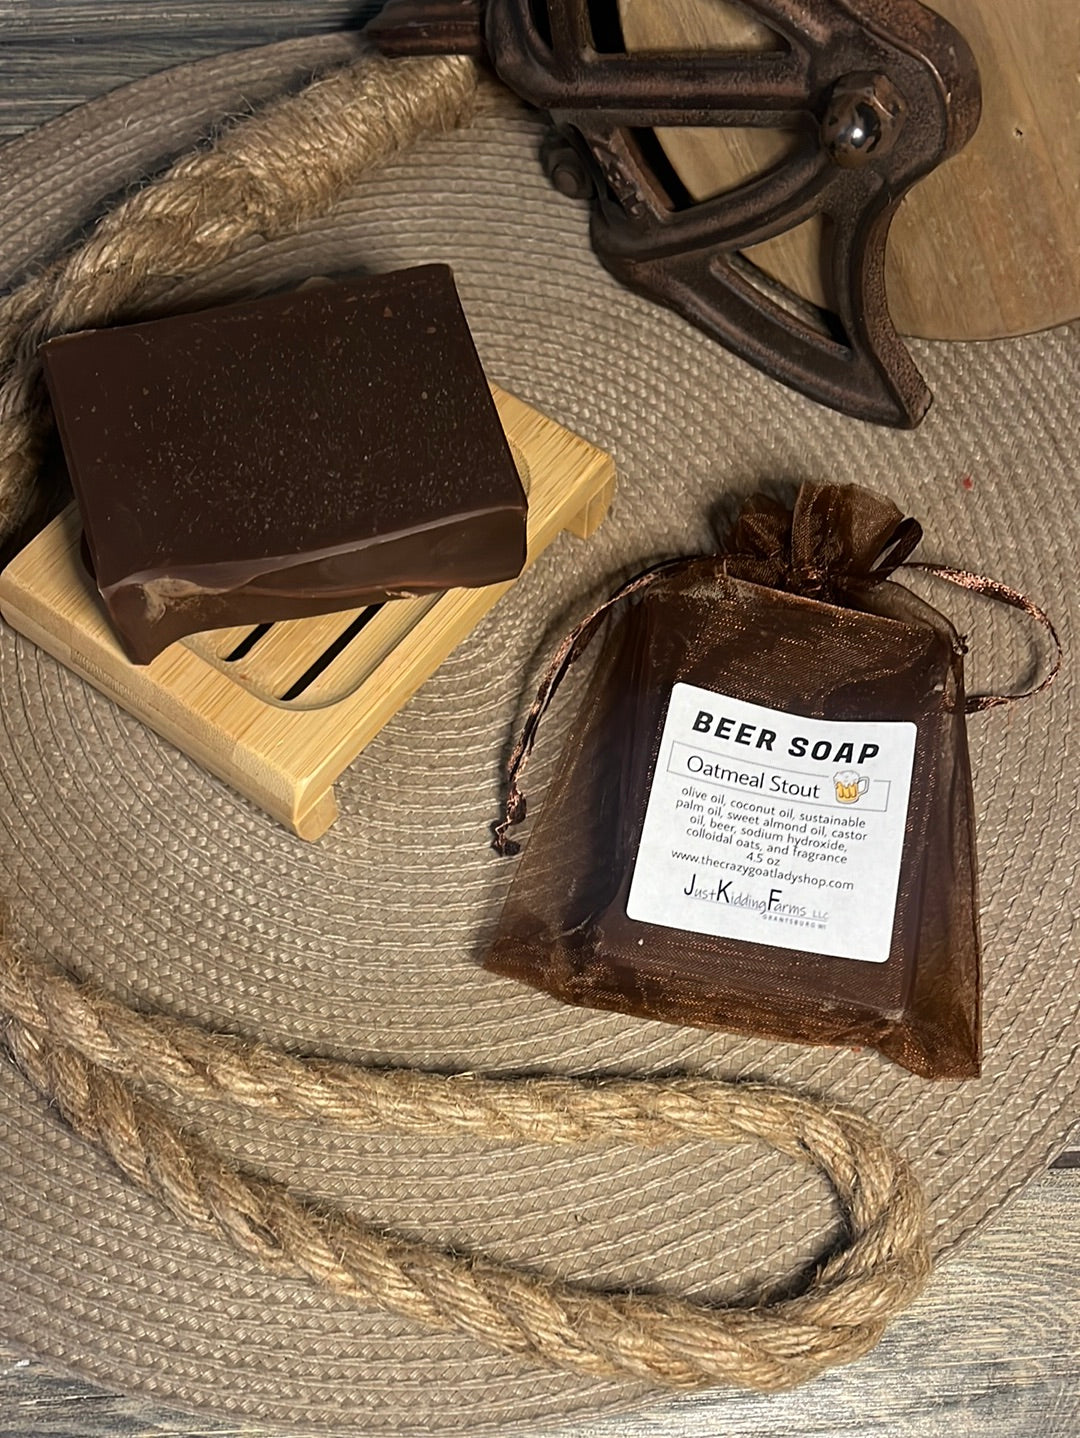 Beer soap oatmeal stout 